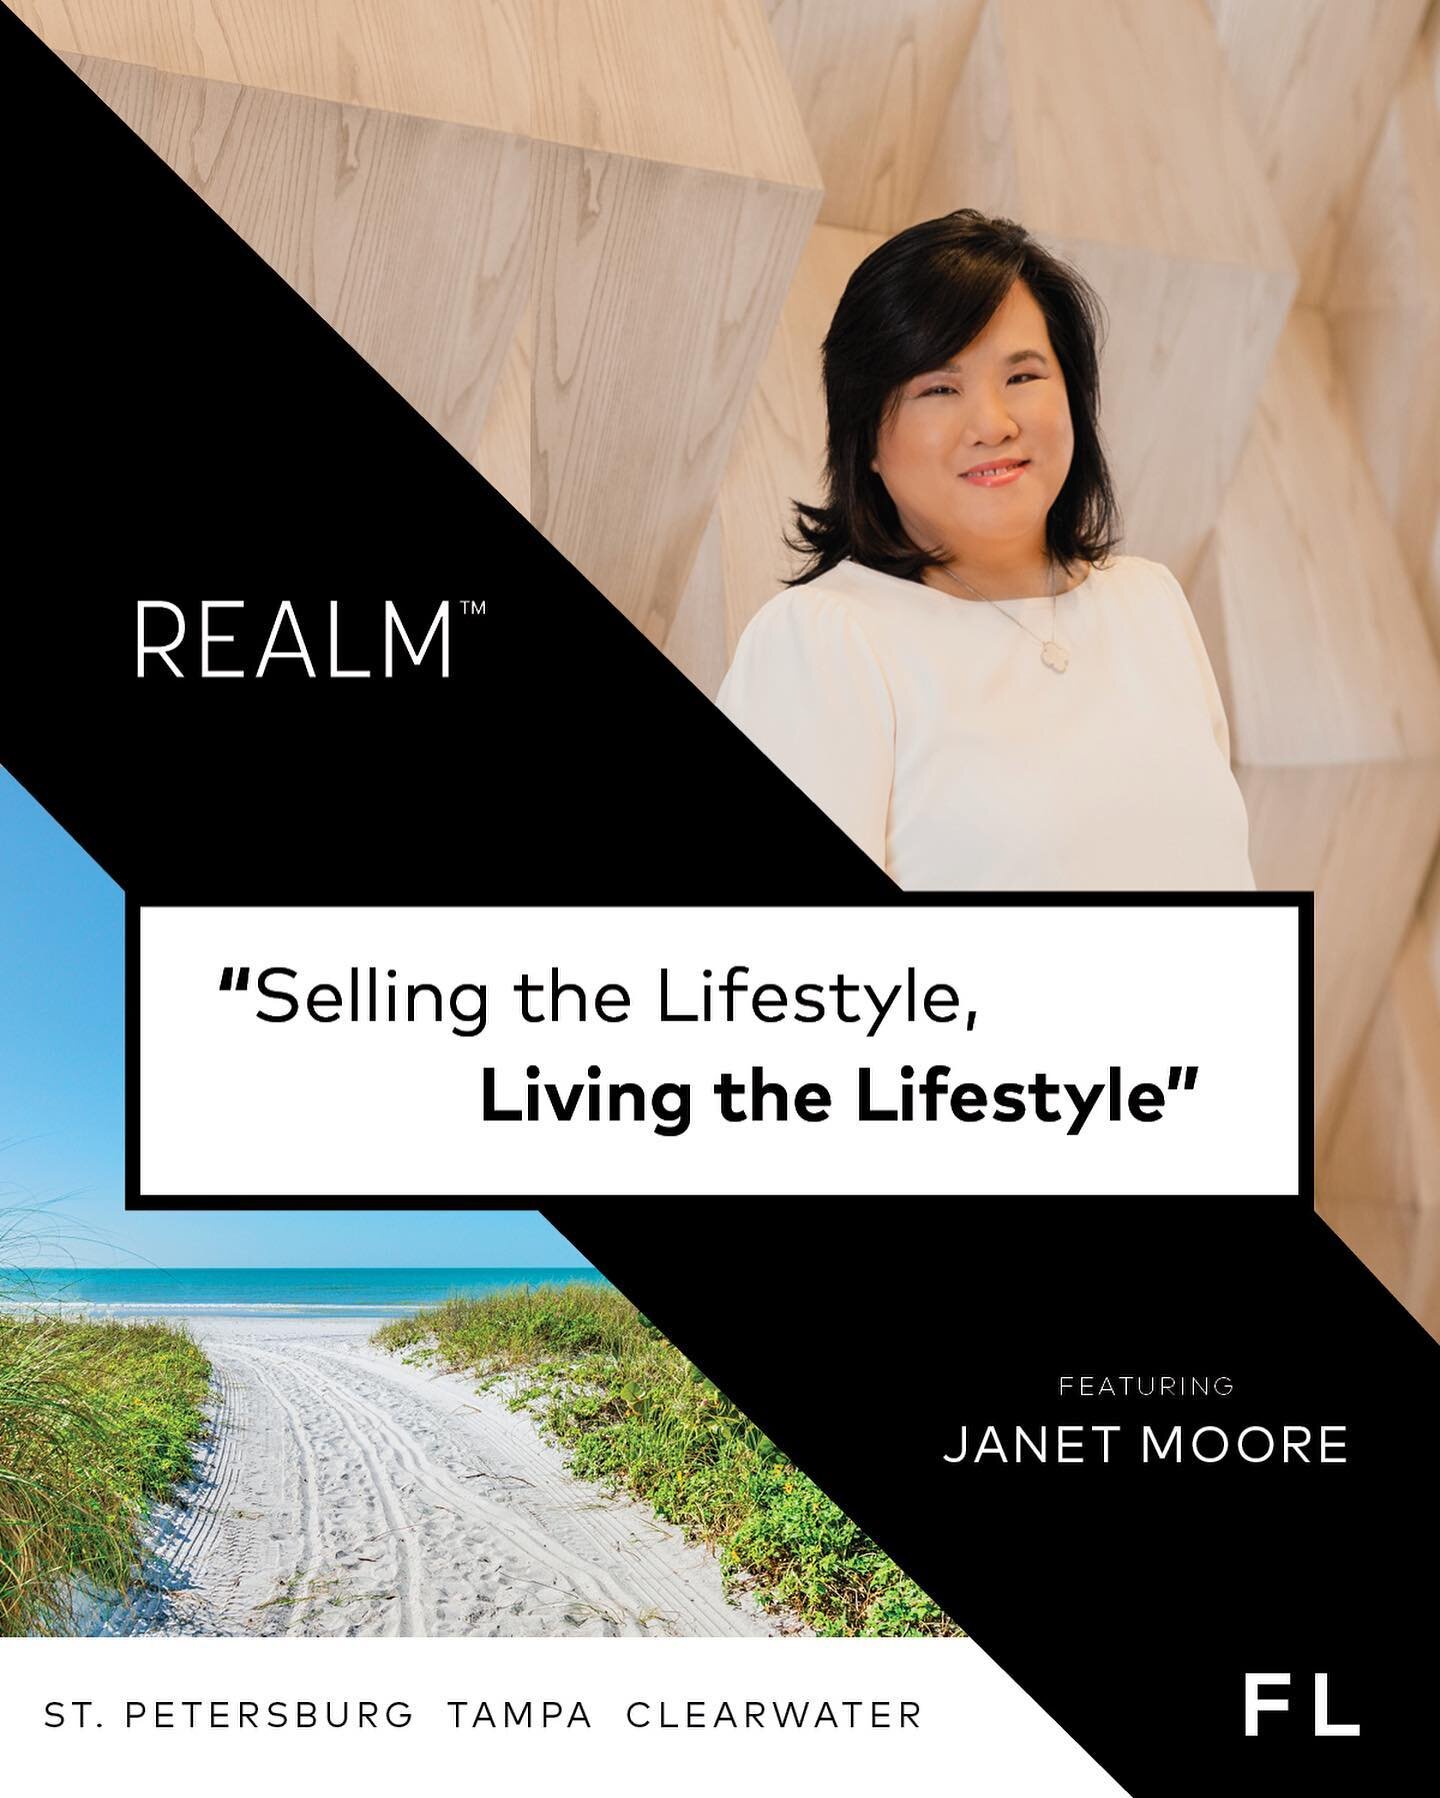 An amazing opportunity to be featured on the Realm panel &quot;Selling the Lifestyle, Living the Lifestyle&quot;

With my recent listing presentation for a $4.5 million luxury property, I noticed my luxury assets and connections made me more assertiv